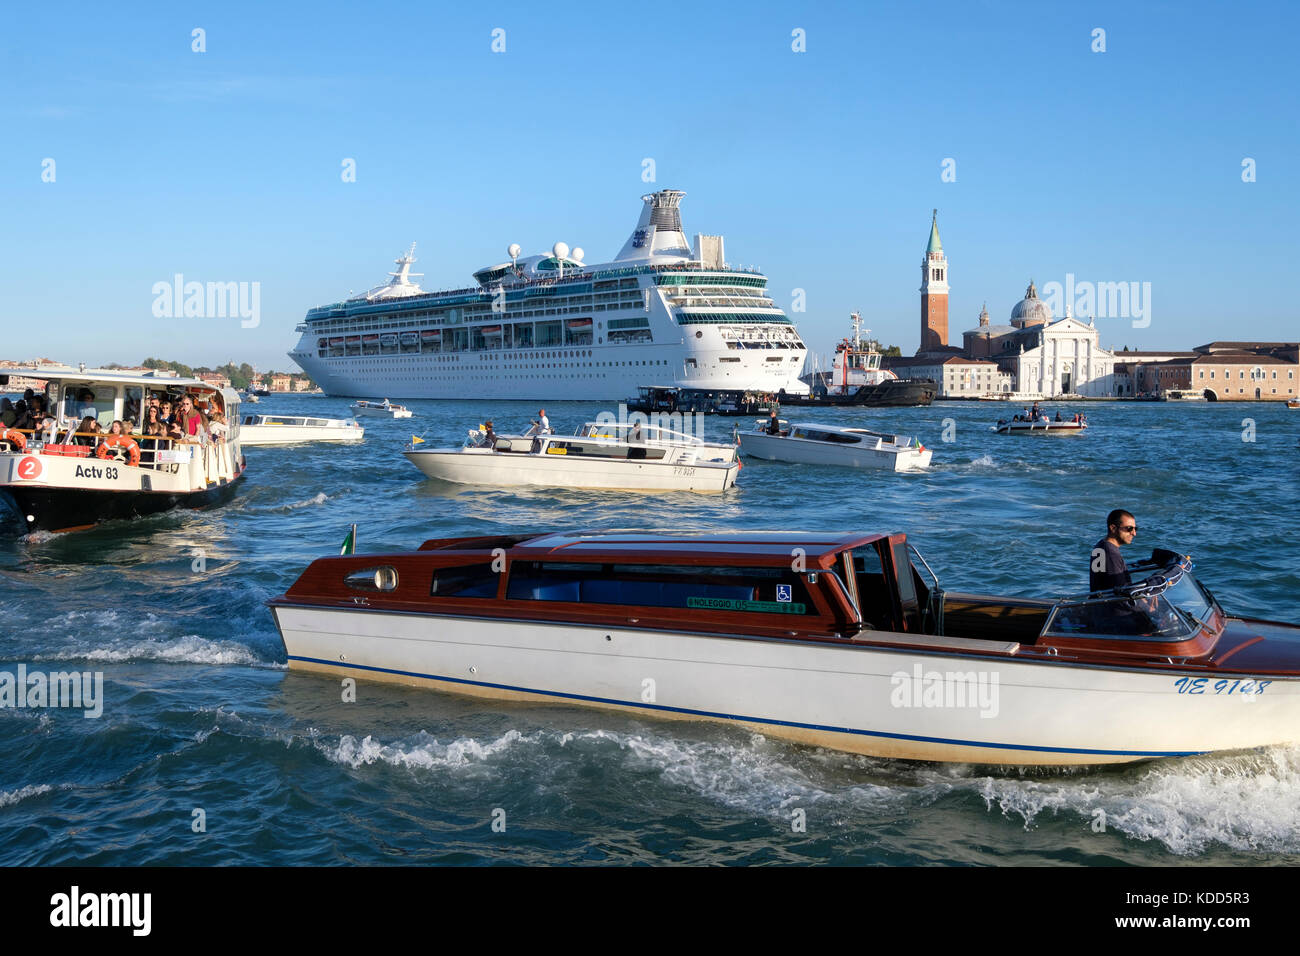 Congestion in the Venetian lagoon as the the Royal Caribbean Cruise ship, 'Rhapsody of the Seas' makes its way past San Giorgio Maggiore. Venice, Ital Stock Photo